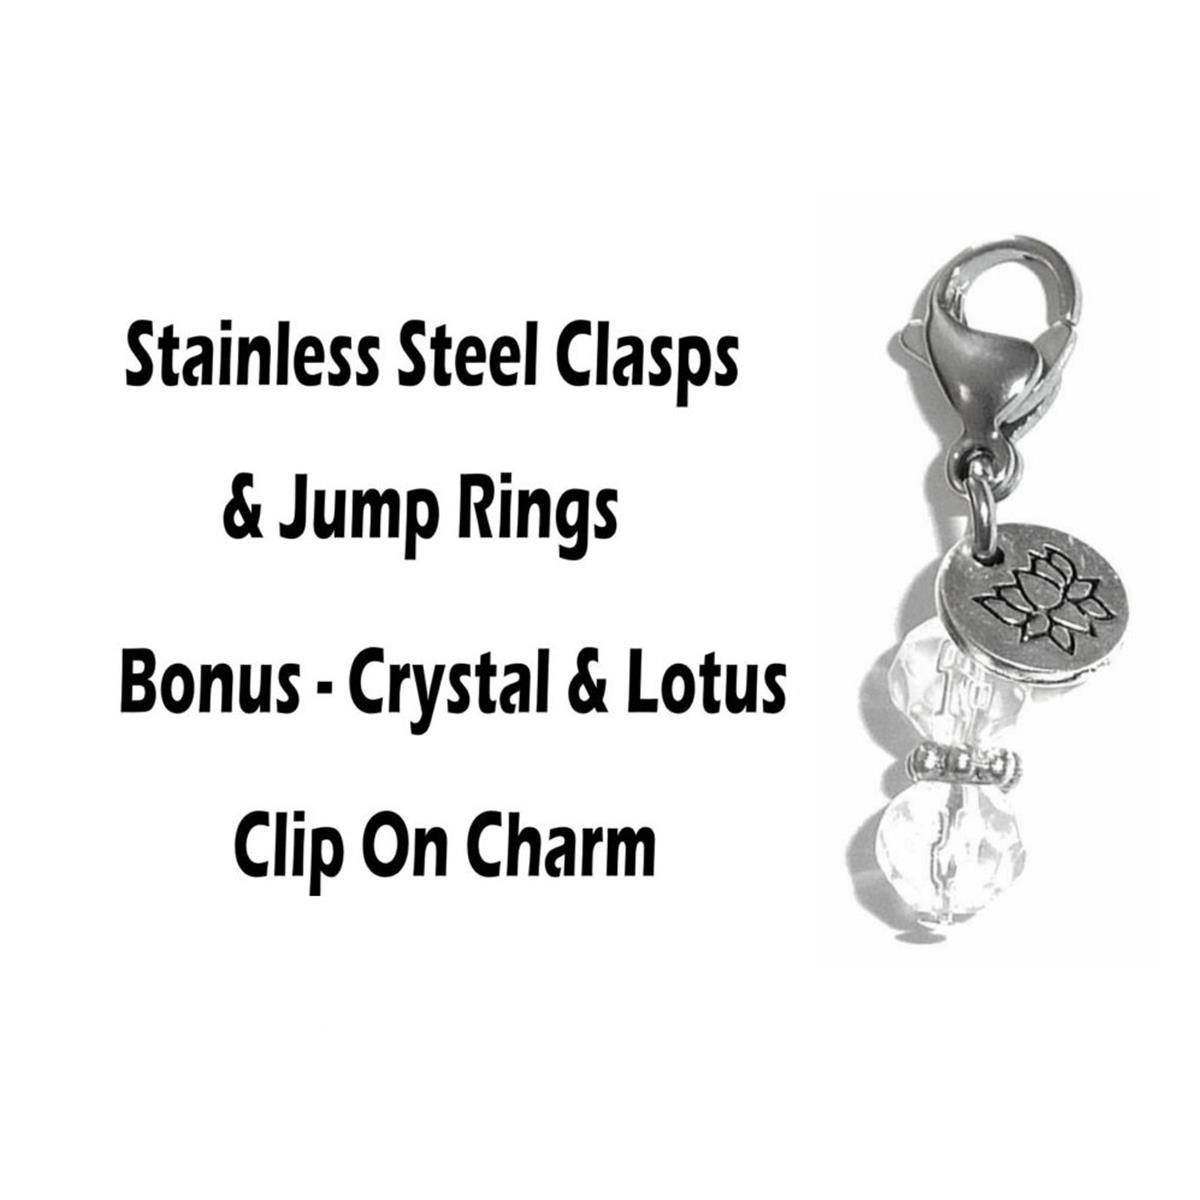 4 Pack Wildlife Clip On Charms - Animal Charms Clip On Anywhere